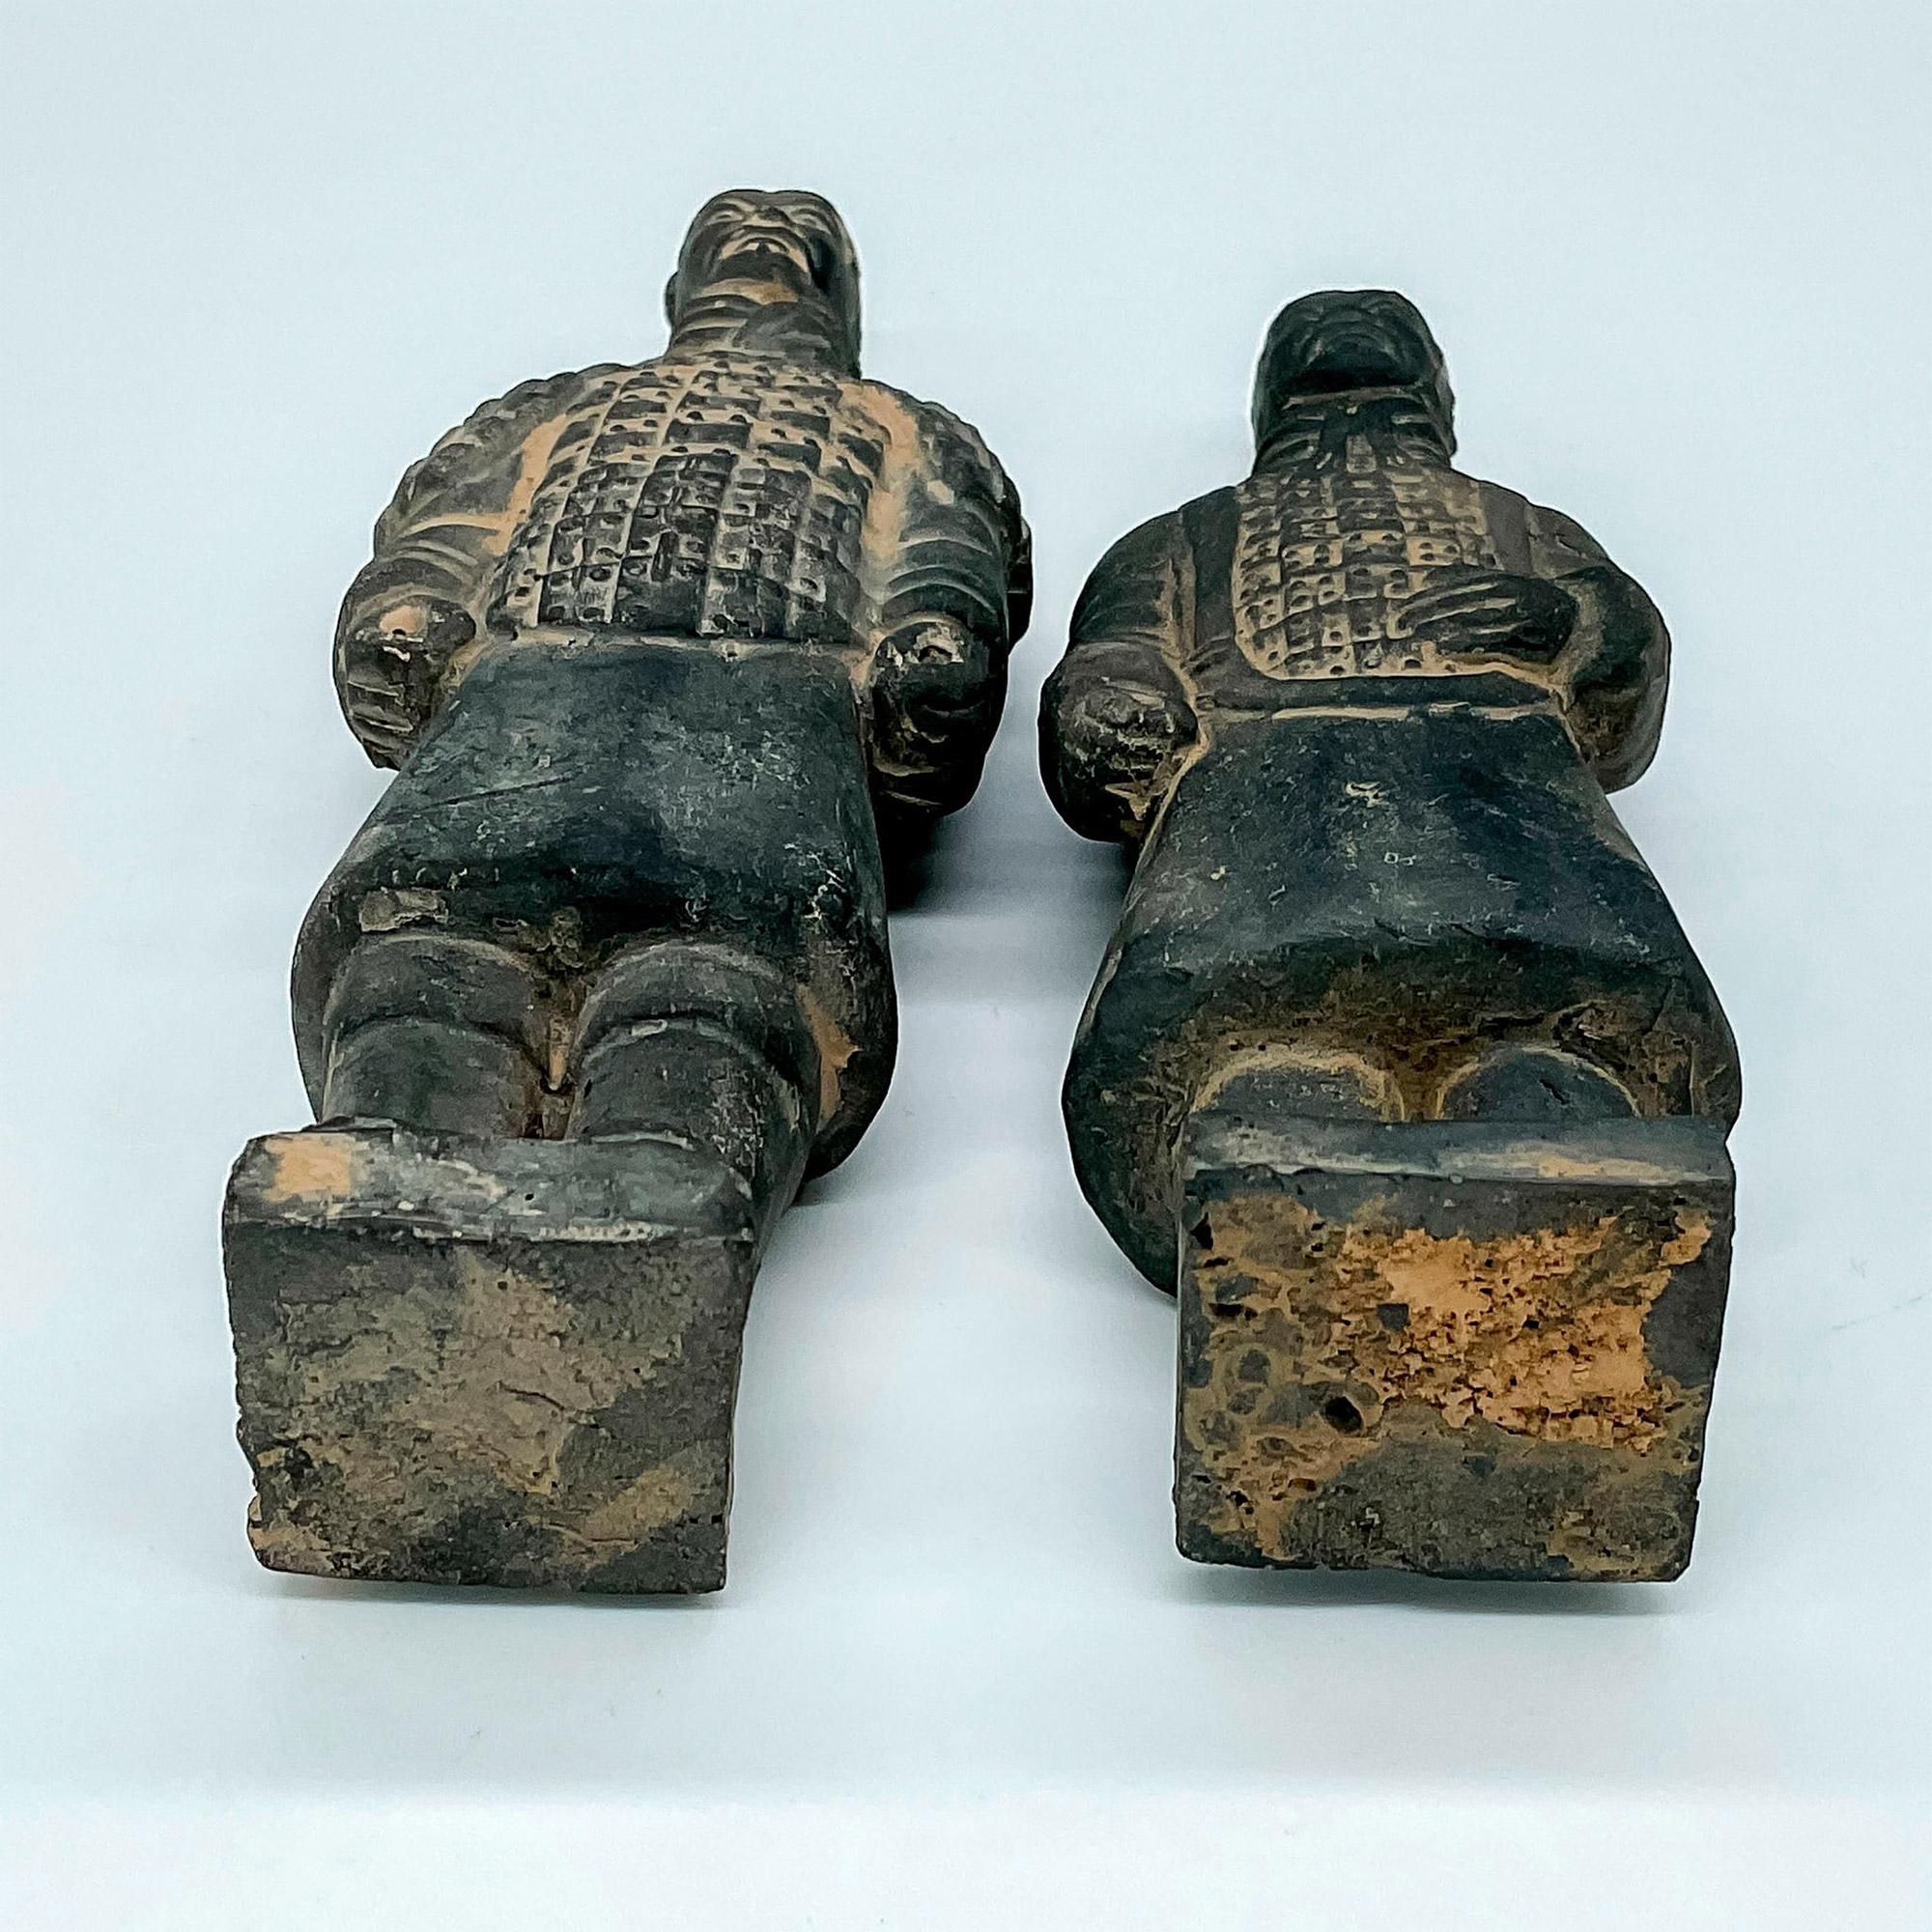 2pc Small Chinese Terracotta Soldier Figurines - Image 3 of 3